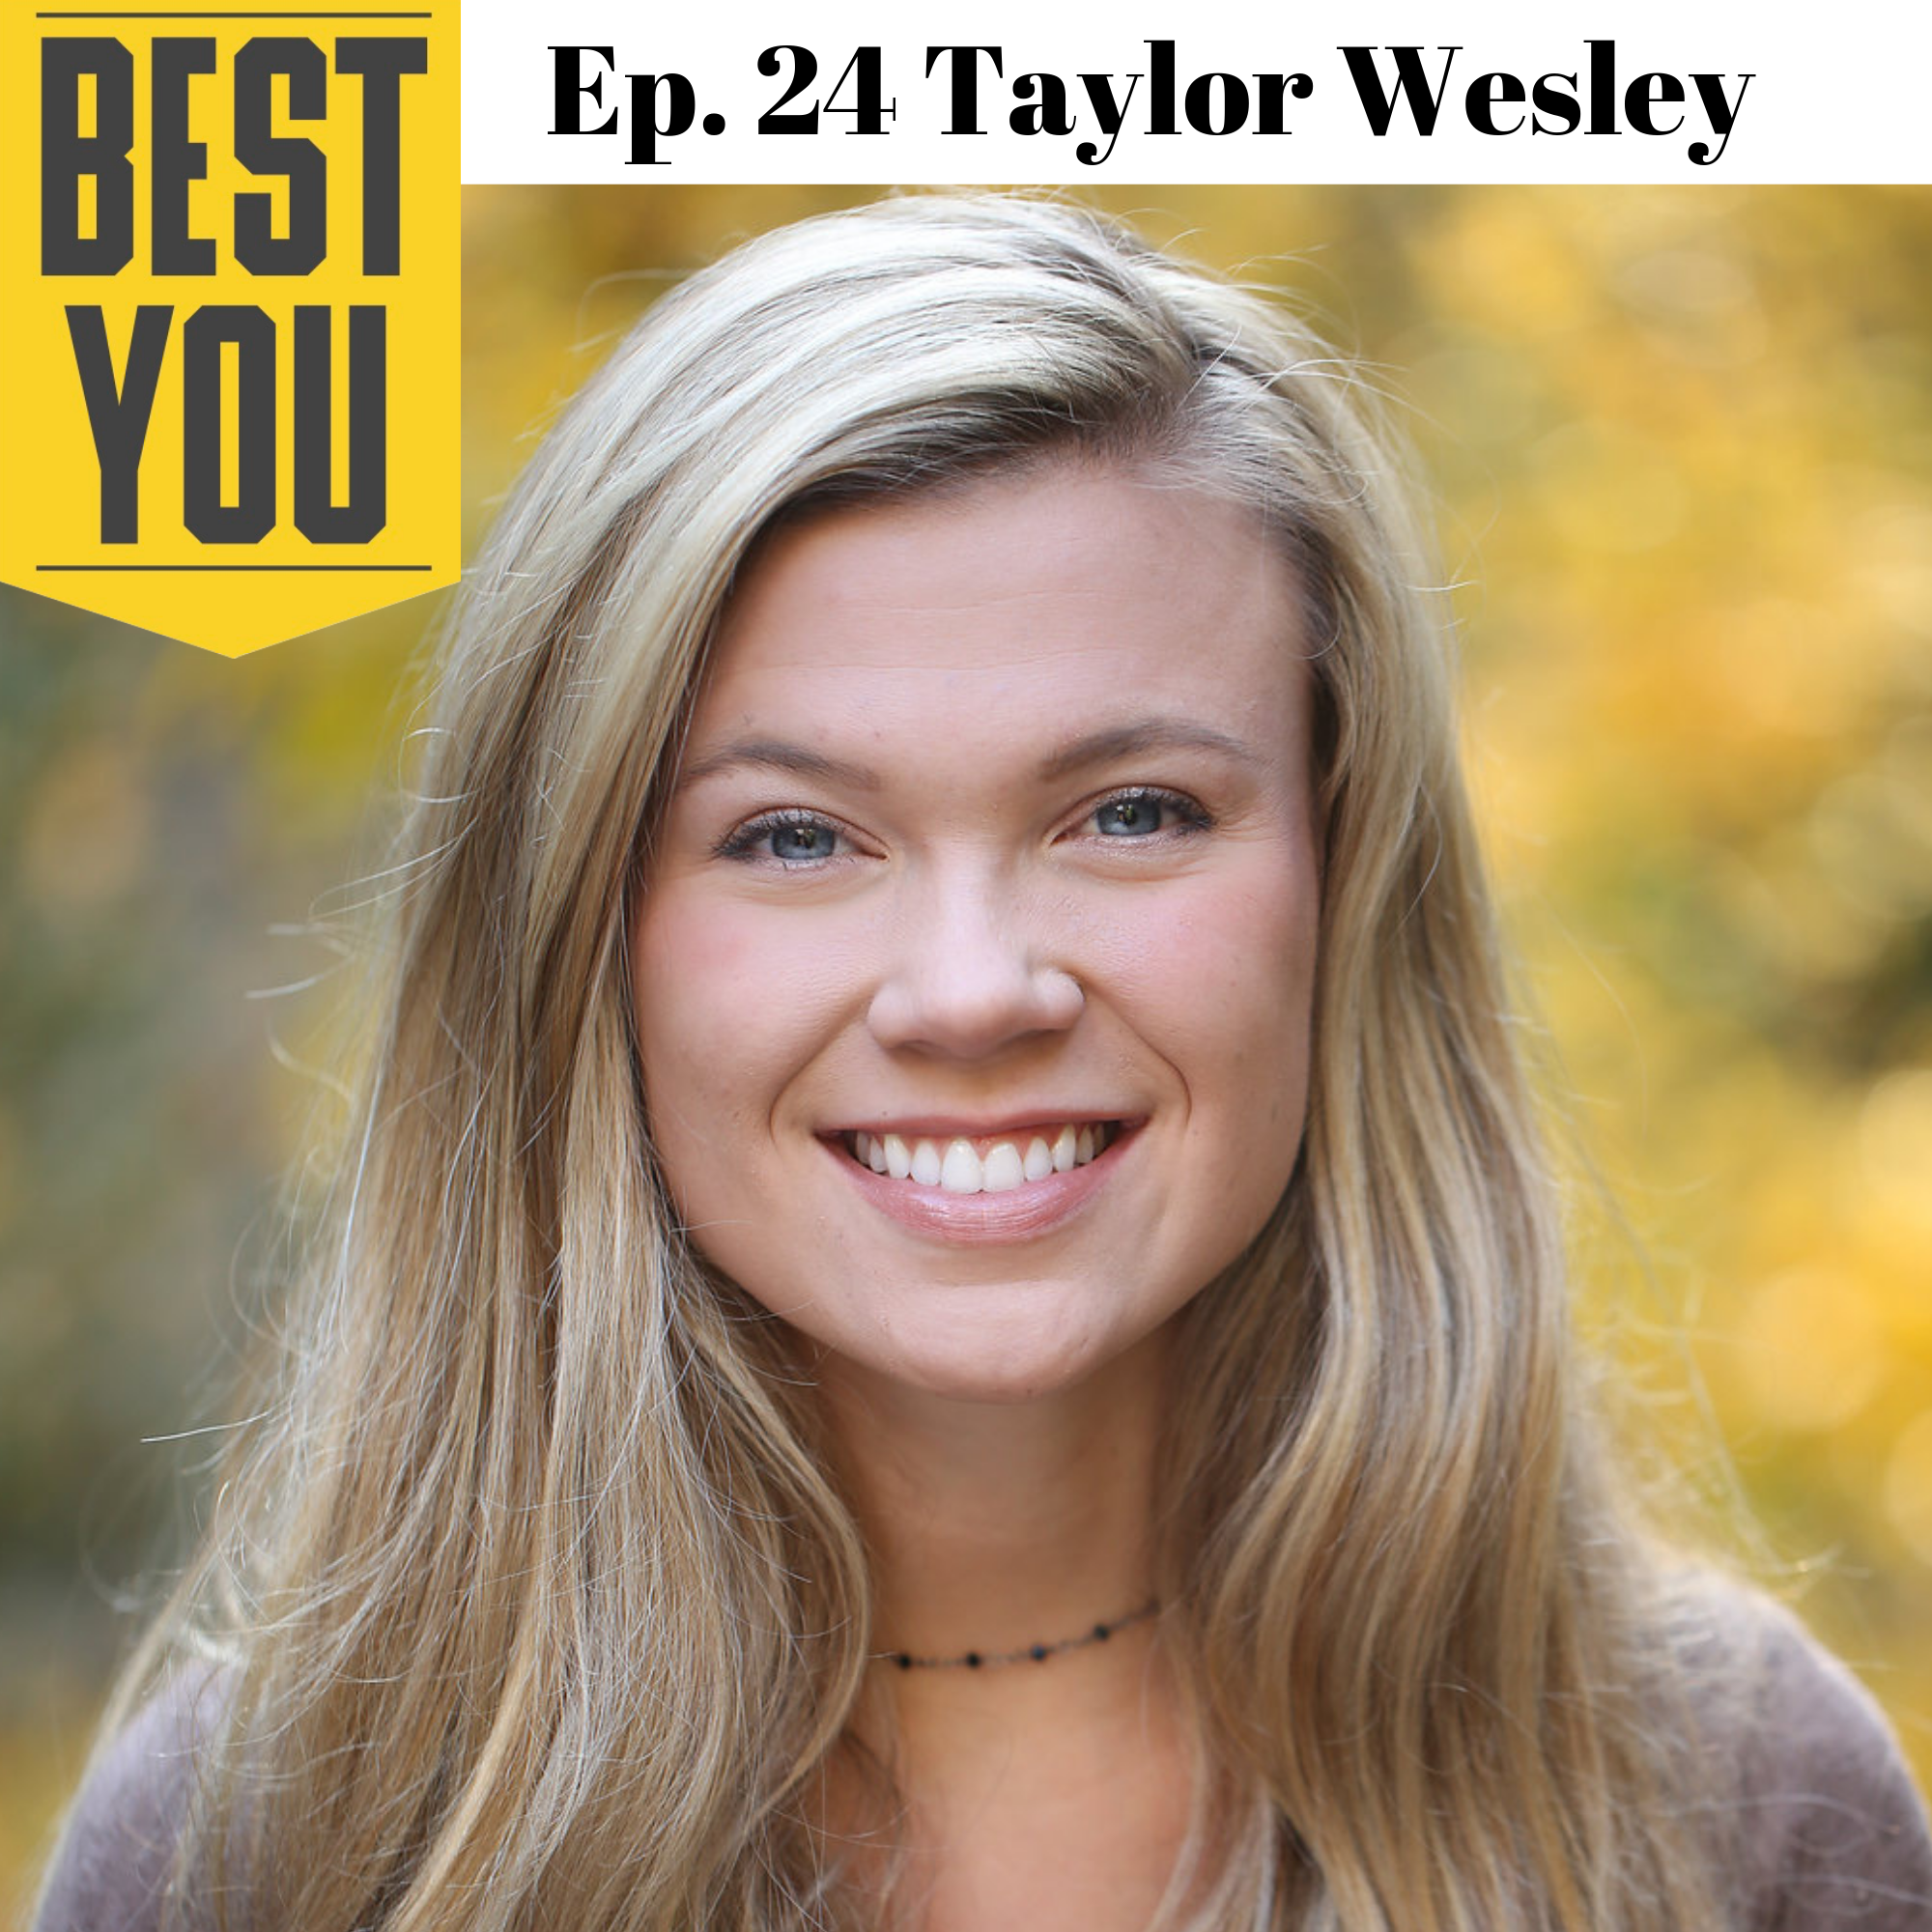 Ep. 47 Taylor Wesley - The Opposite of Addiction is Connection